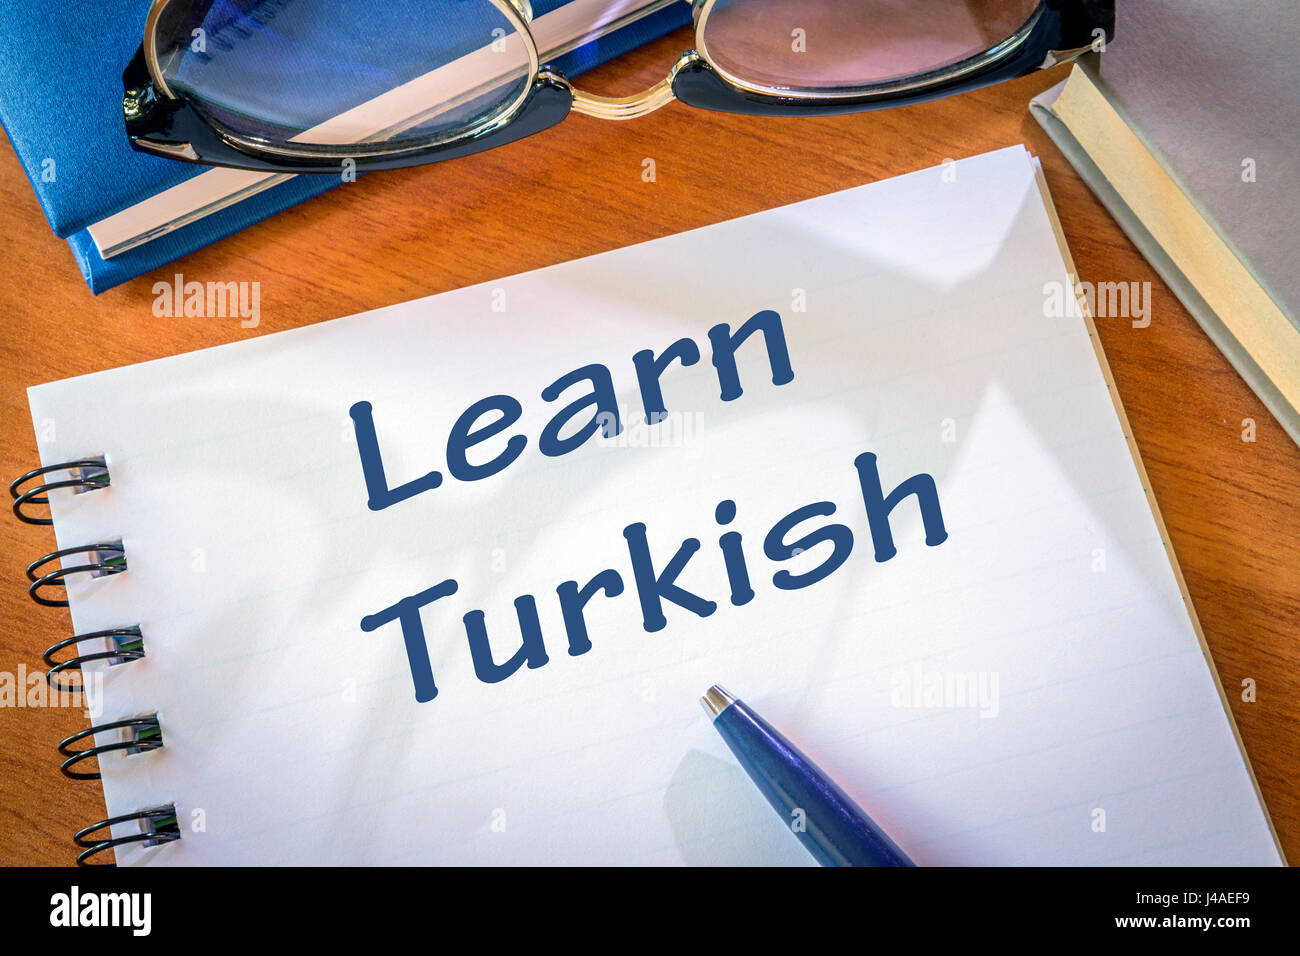 Learn turkish written in a notepad. Education concept Stock Photo